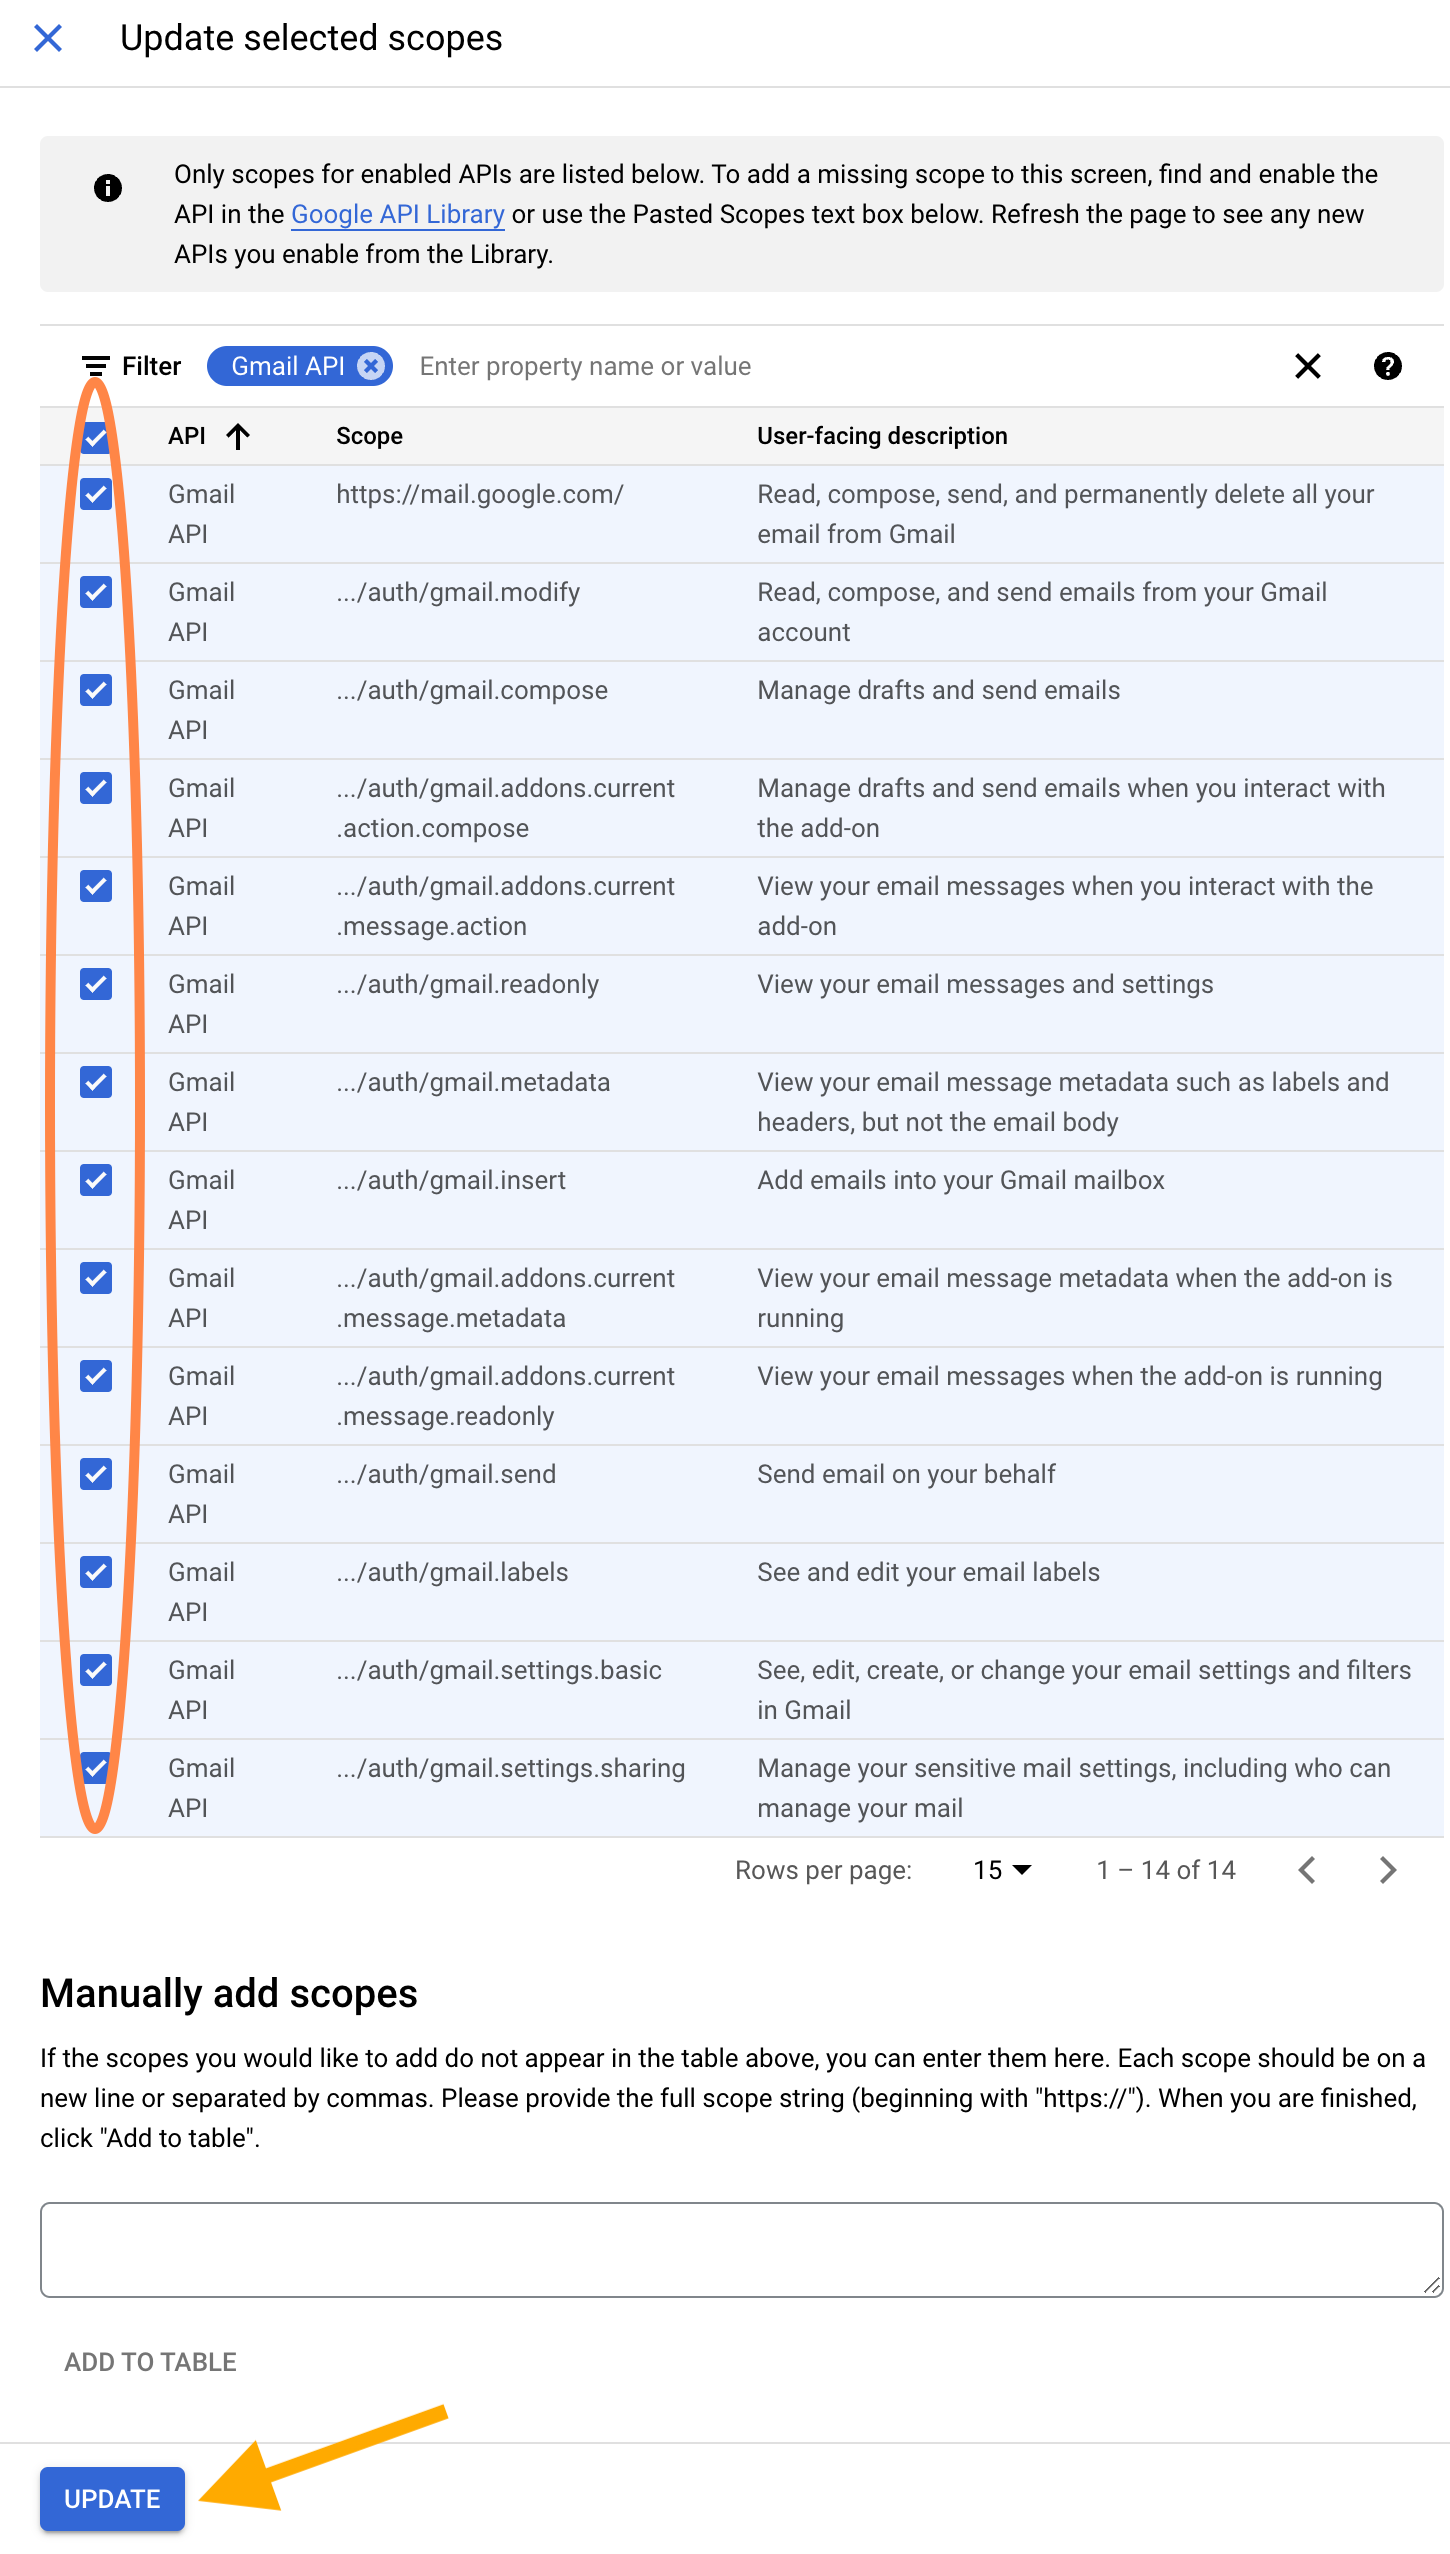 Screenshot showing many checked checkboxes for the Gmail API scopes.